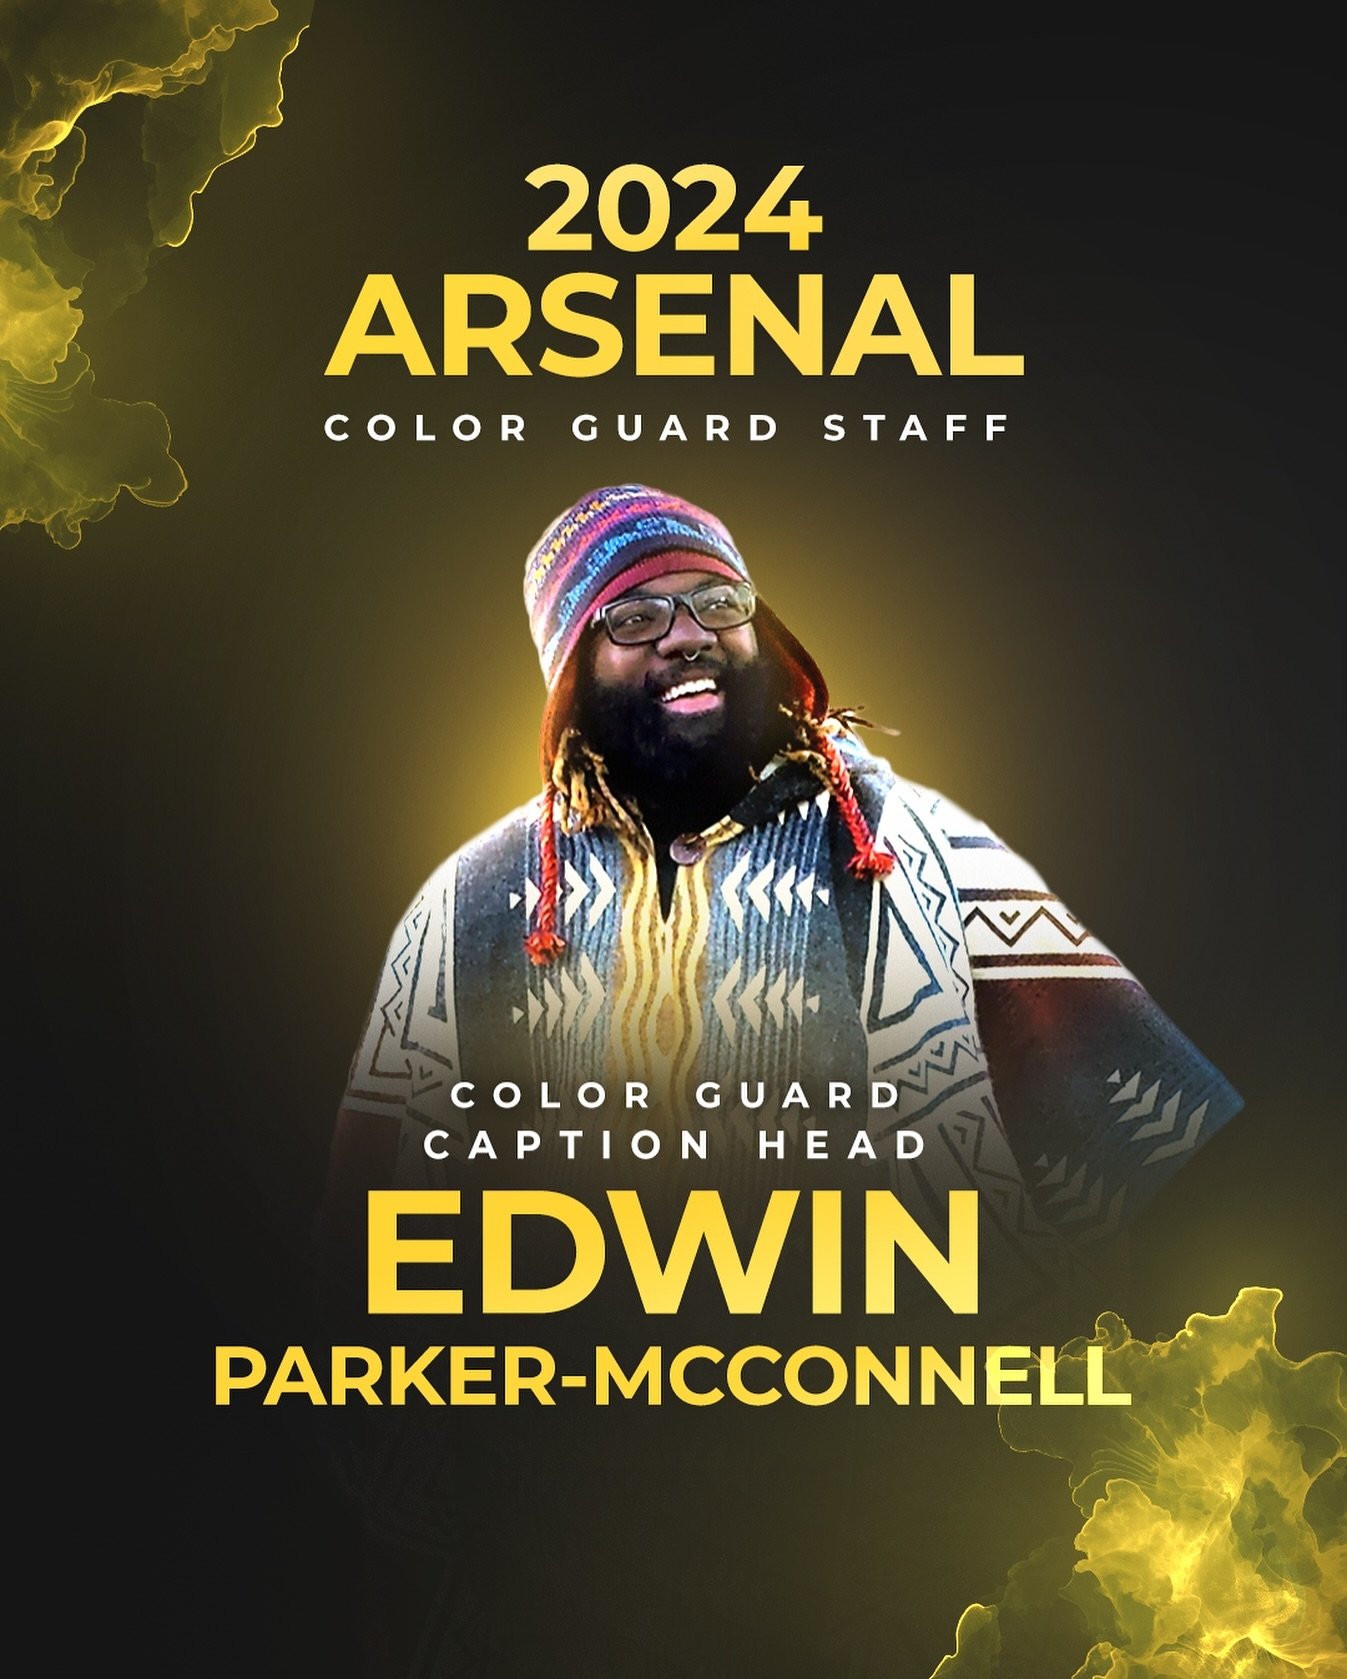 Presenting our 2024 Arsenal Color Guard Caption Head, Edwin Parker-McConnell! 

Edwin Parker-McConnell is a New Mexico based music educator, colorguard instructor, choreographer, show/program designer and founding staff member of Arsenal. He has taug